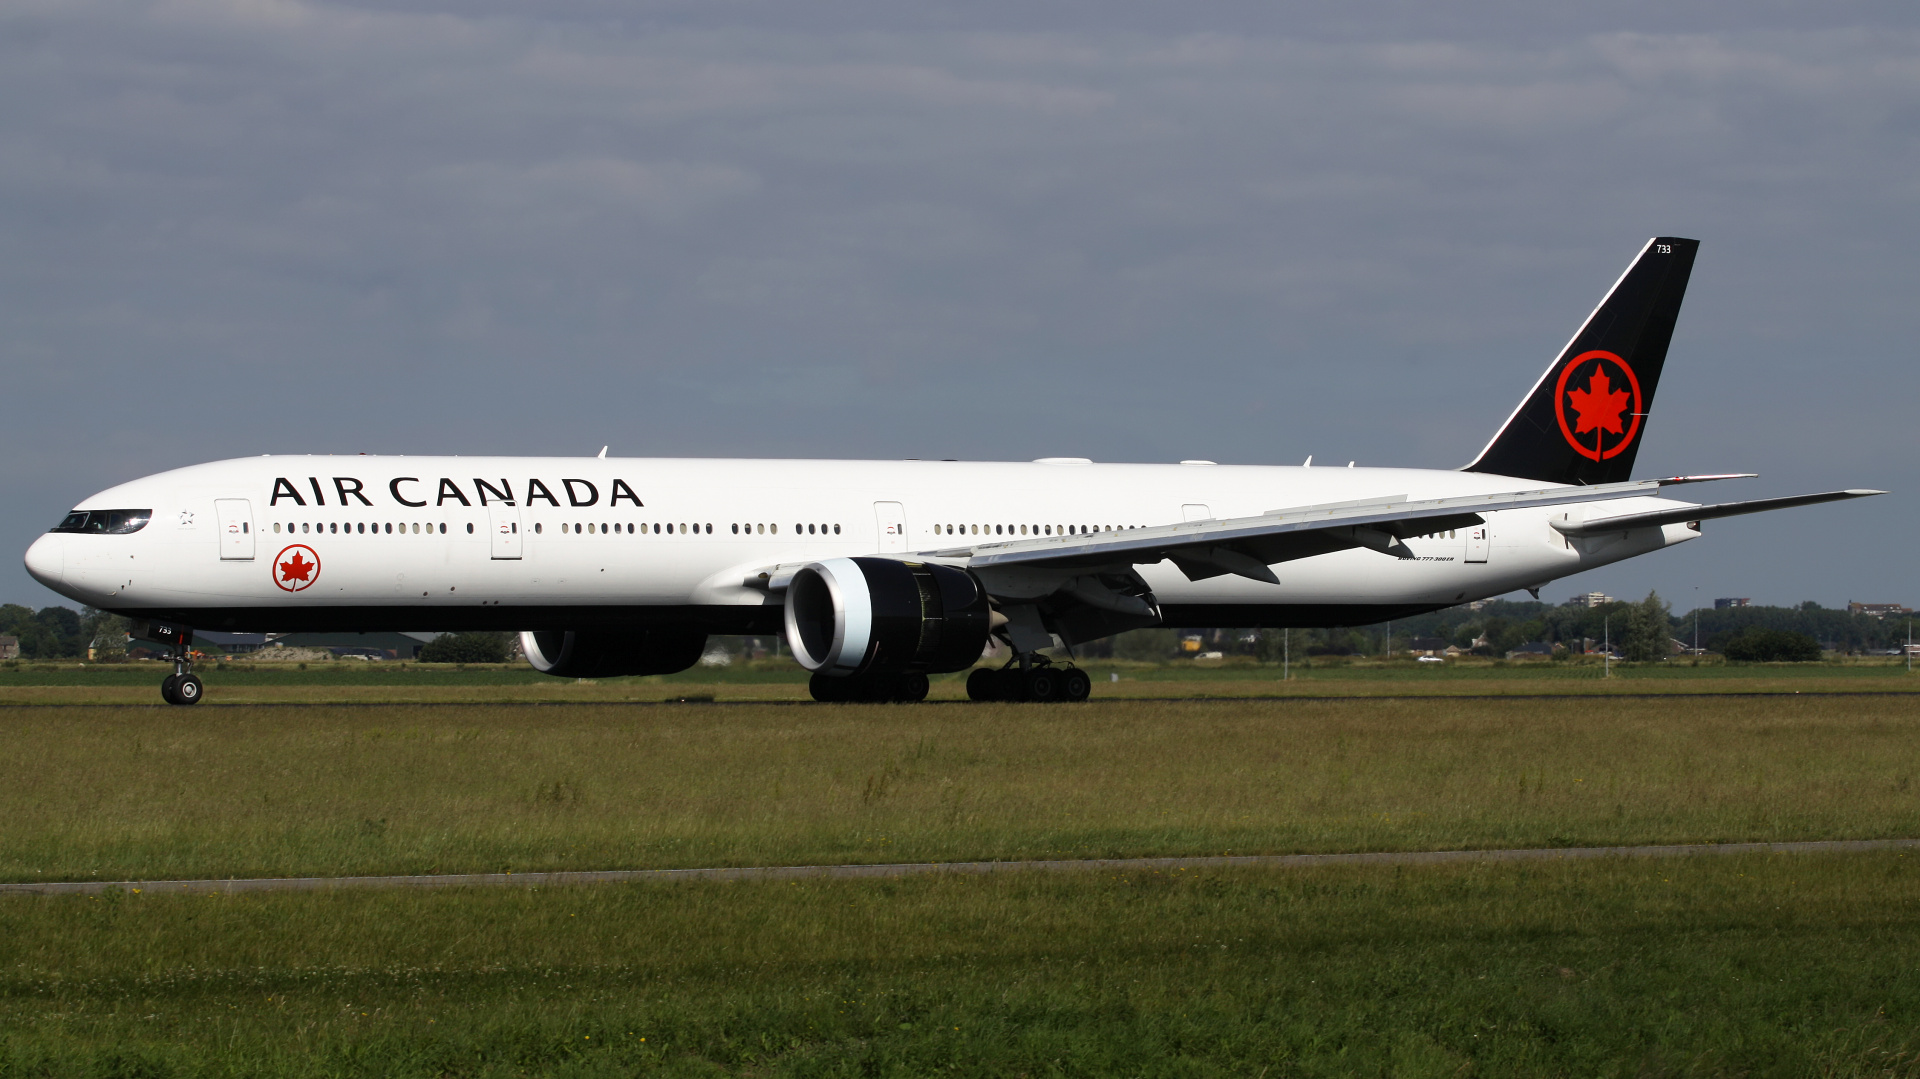 C-FITW, Air Canada (Aircraft » Schiphol Spotting » Boeing 777-300ER)